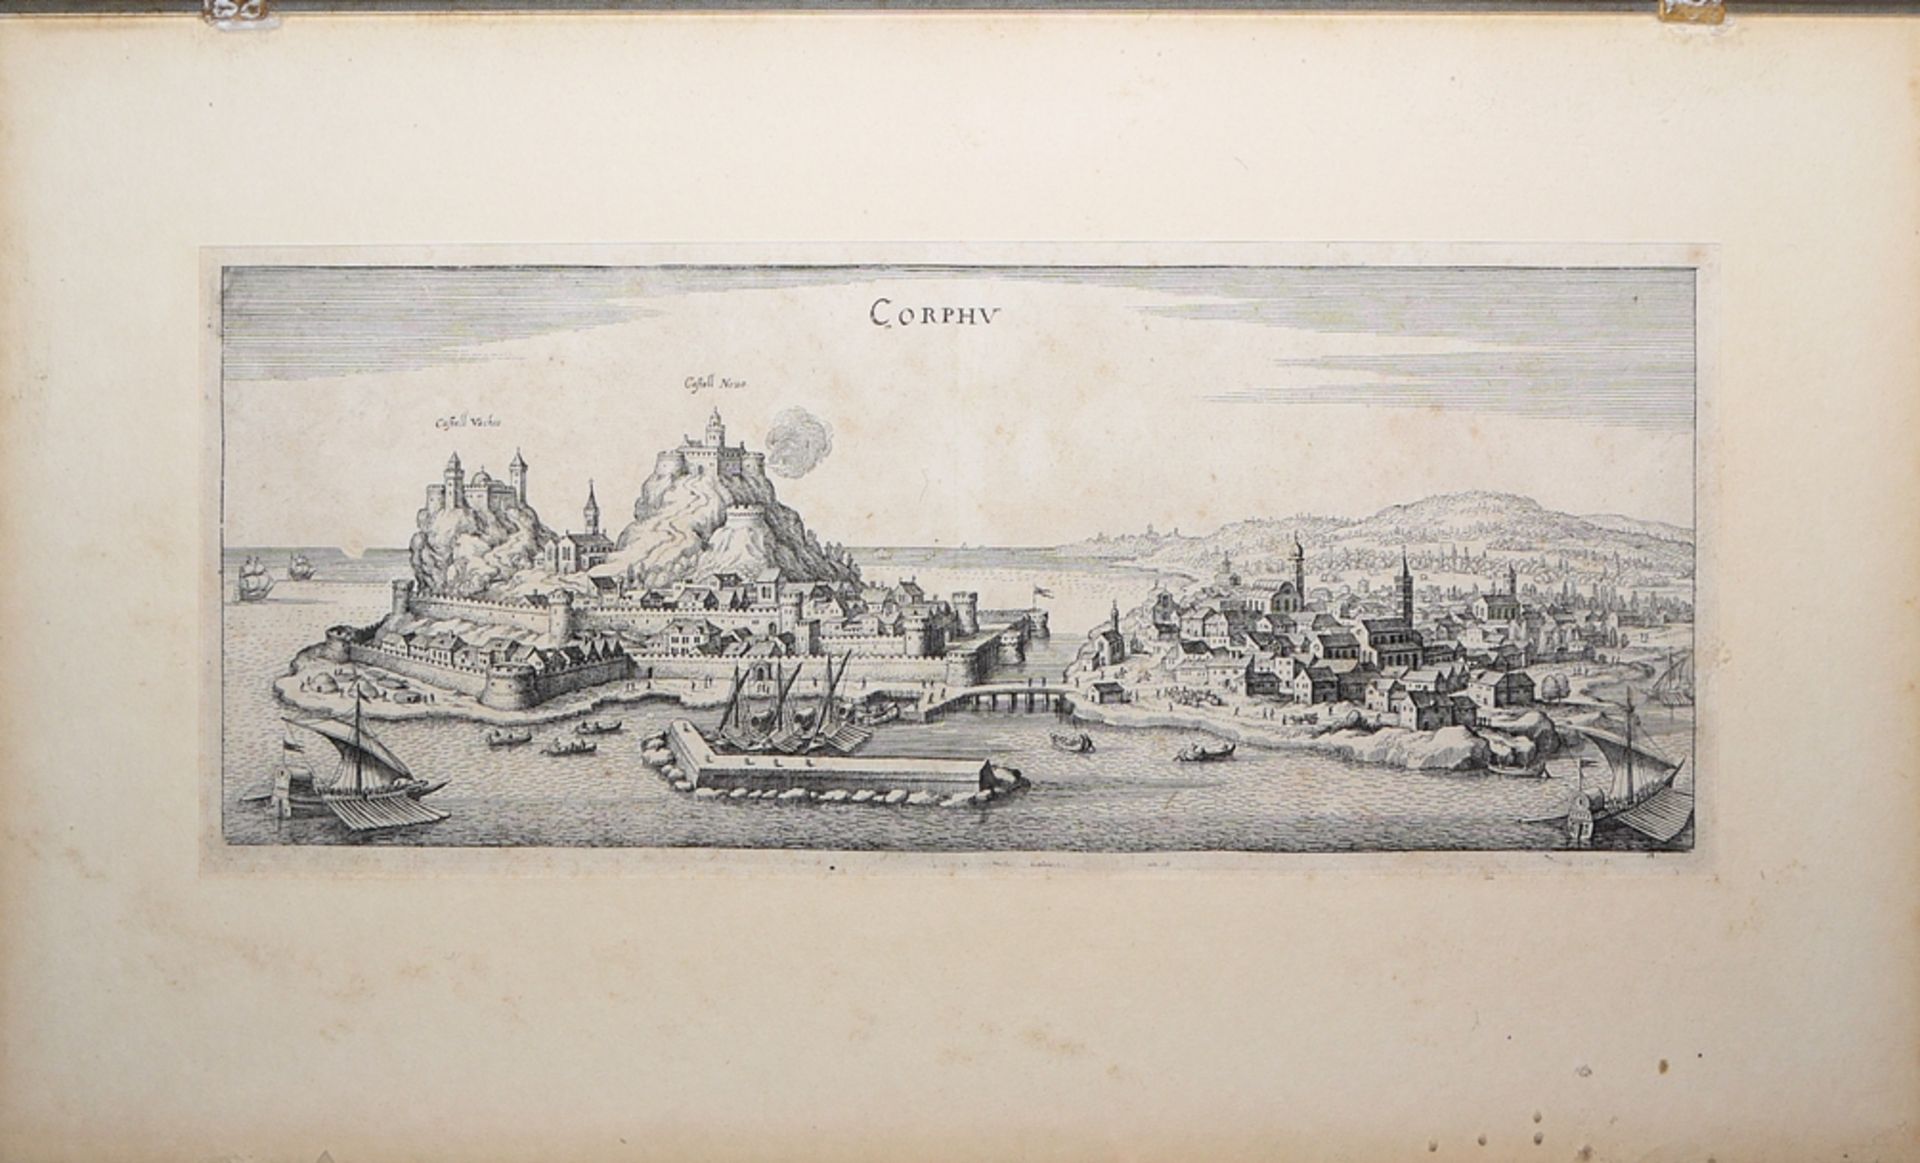 Map of the Bosporus, 2 x Constantinople and Corfu from a bird's-eye view, once by Merian as well as